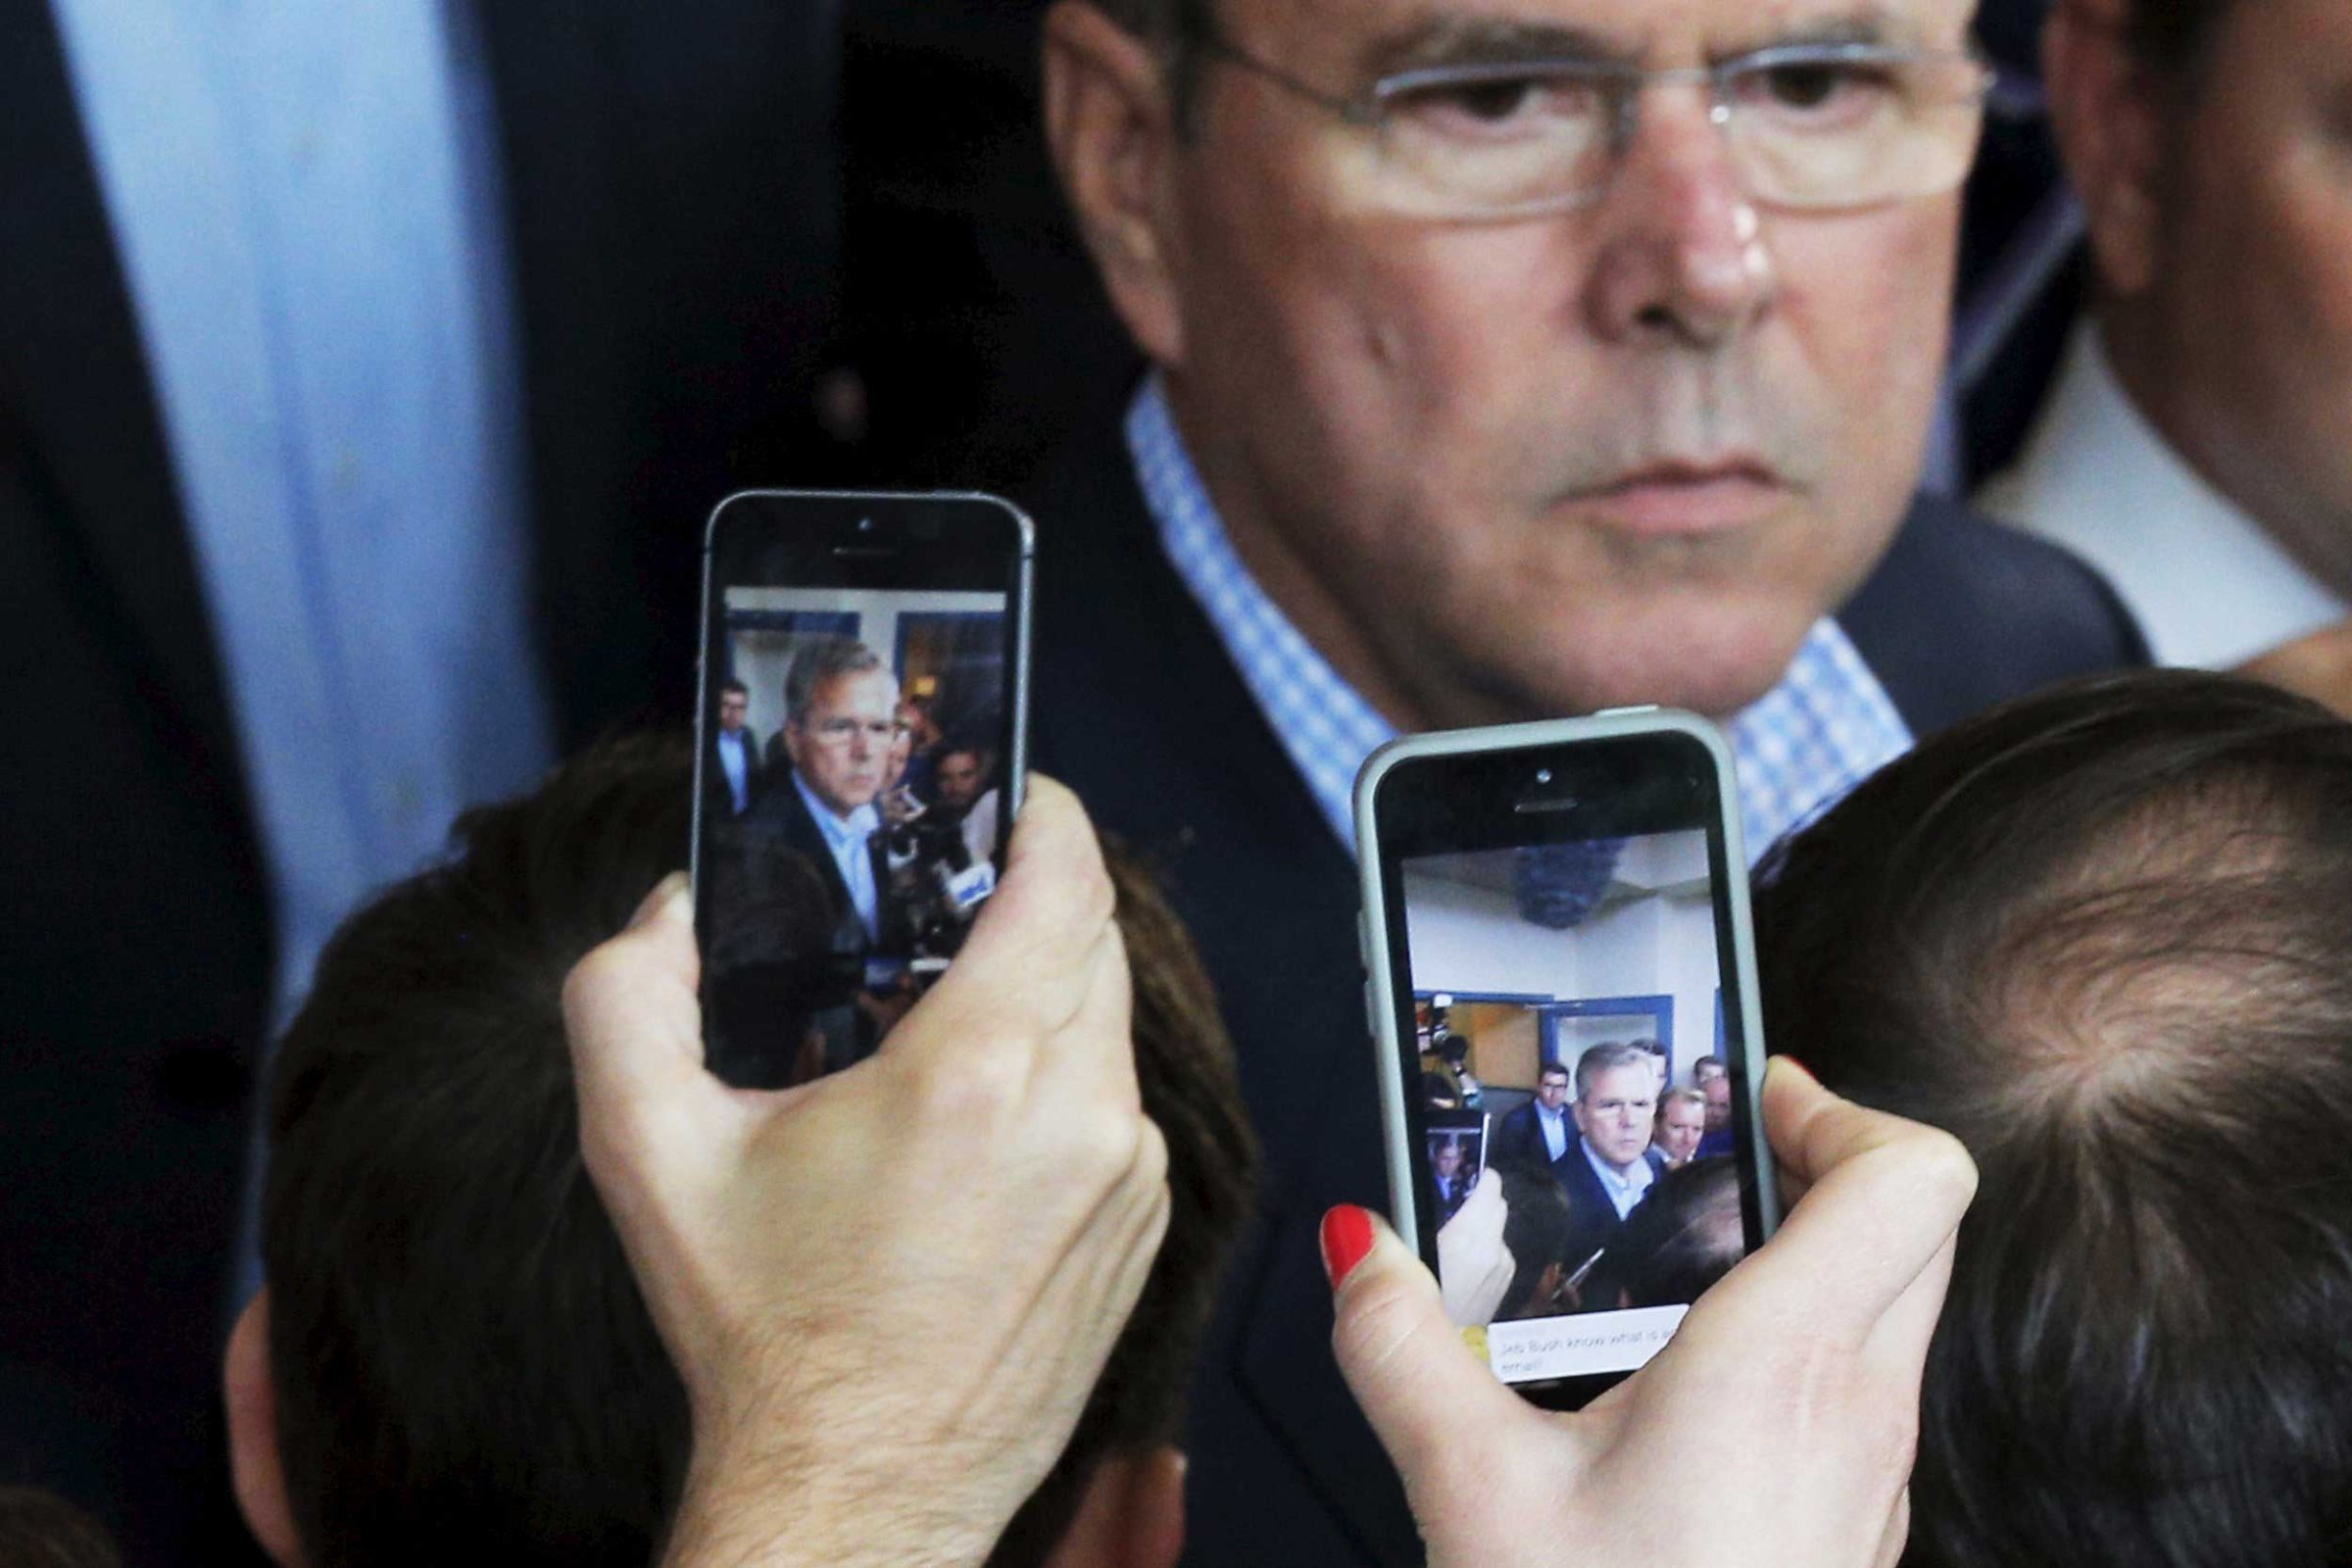 Reporters use their mobile phones to record potential 2016 Republican presidential candidate Jeb Bush as he answers questions after a business roundtable in Portsmouth, N.H. on May 20, 2015.